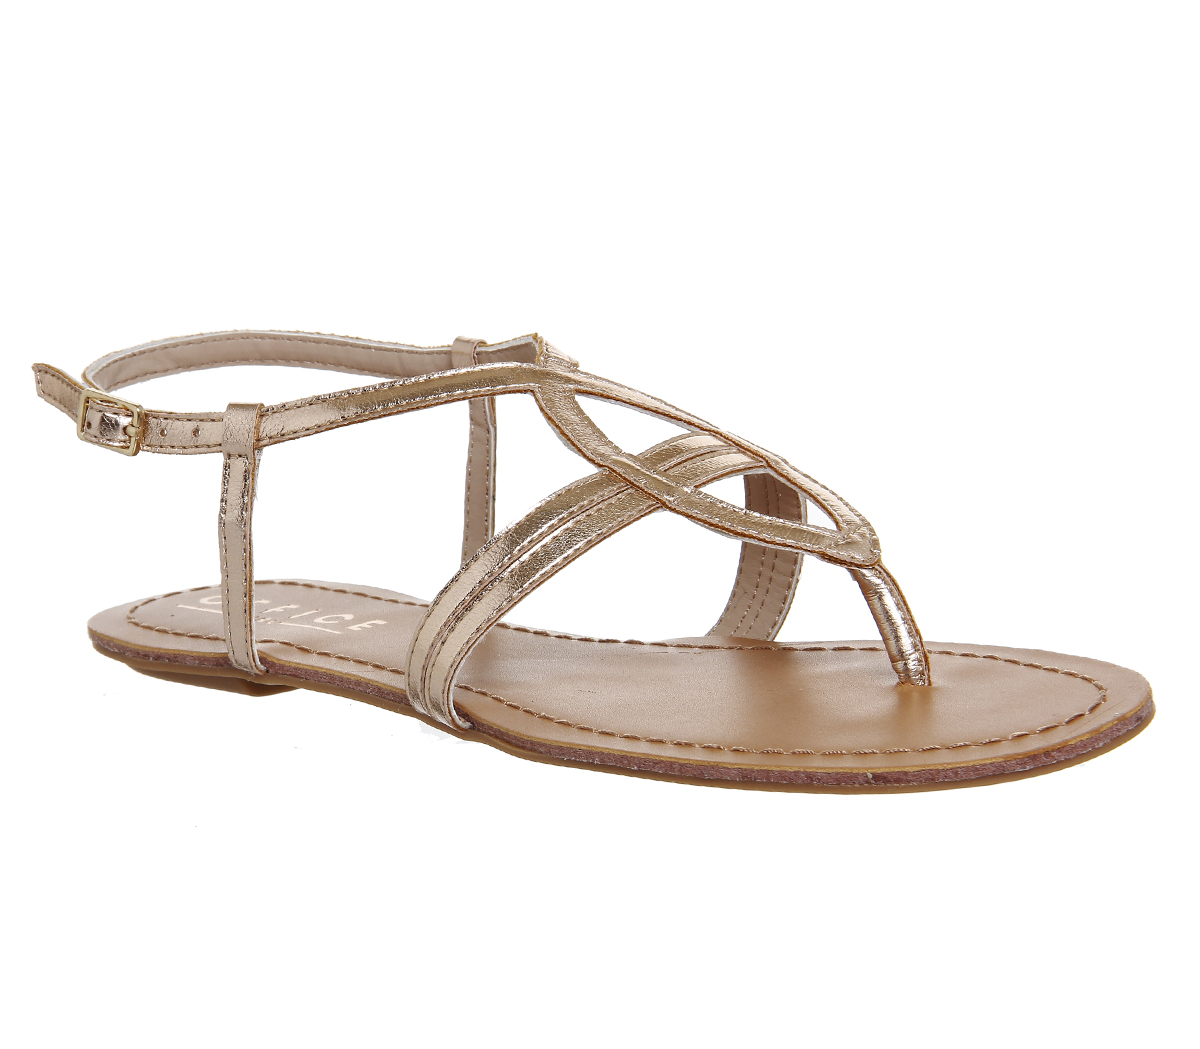 OFFICE Believe Strappy Sandals Rose Gold - Women’s Sandals